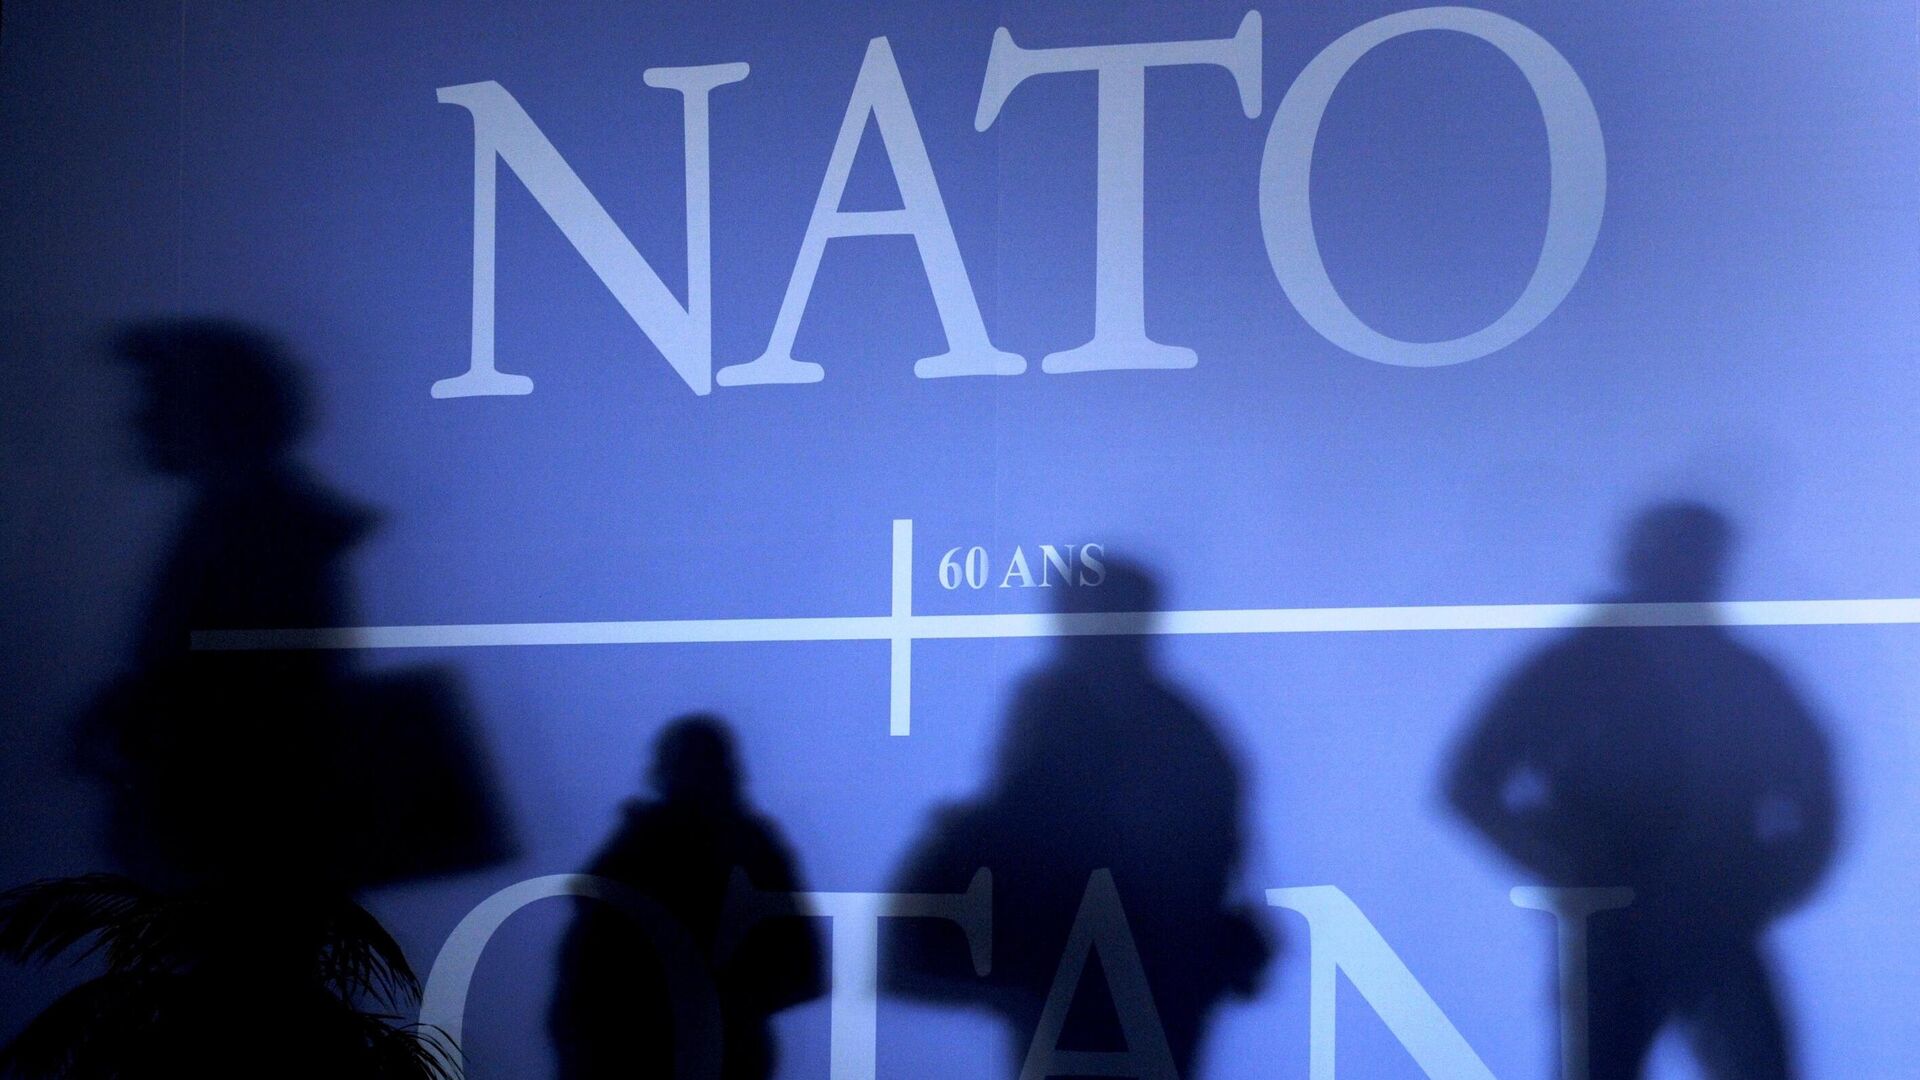 This April 2, 2009 file photo shows shadows cast on a wall decorated with the NATO logo and flags of NATO countries in Strasbourg, eastern France, before the start of the NATO summit which marked the organisation's 60th anniversary.  - Sputnik International, 1920, 27.03.2023